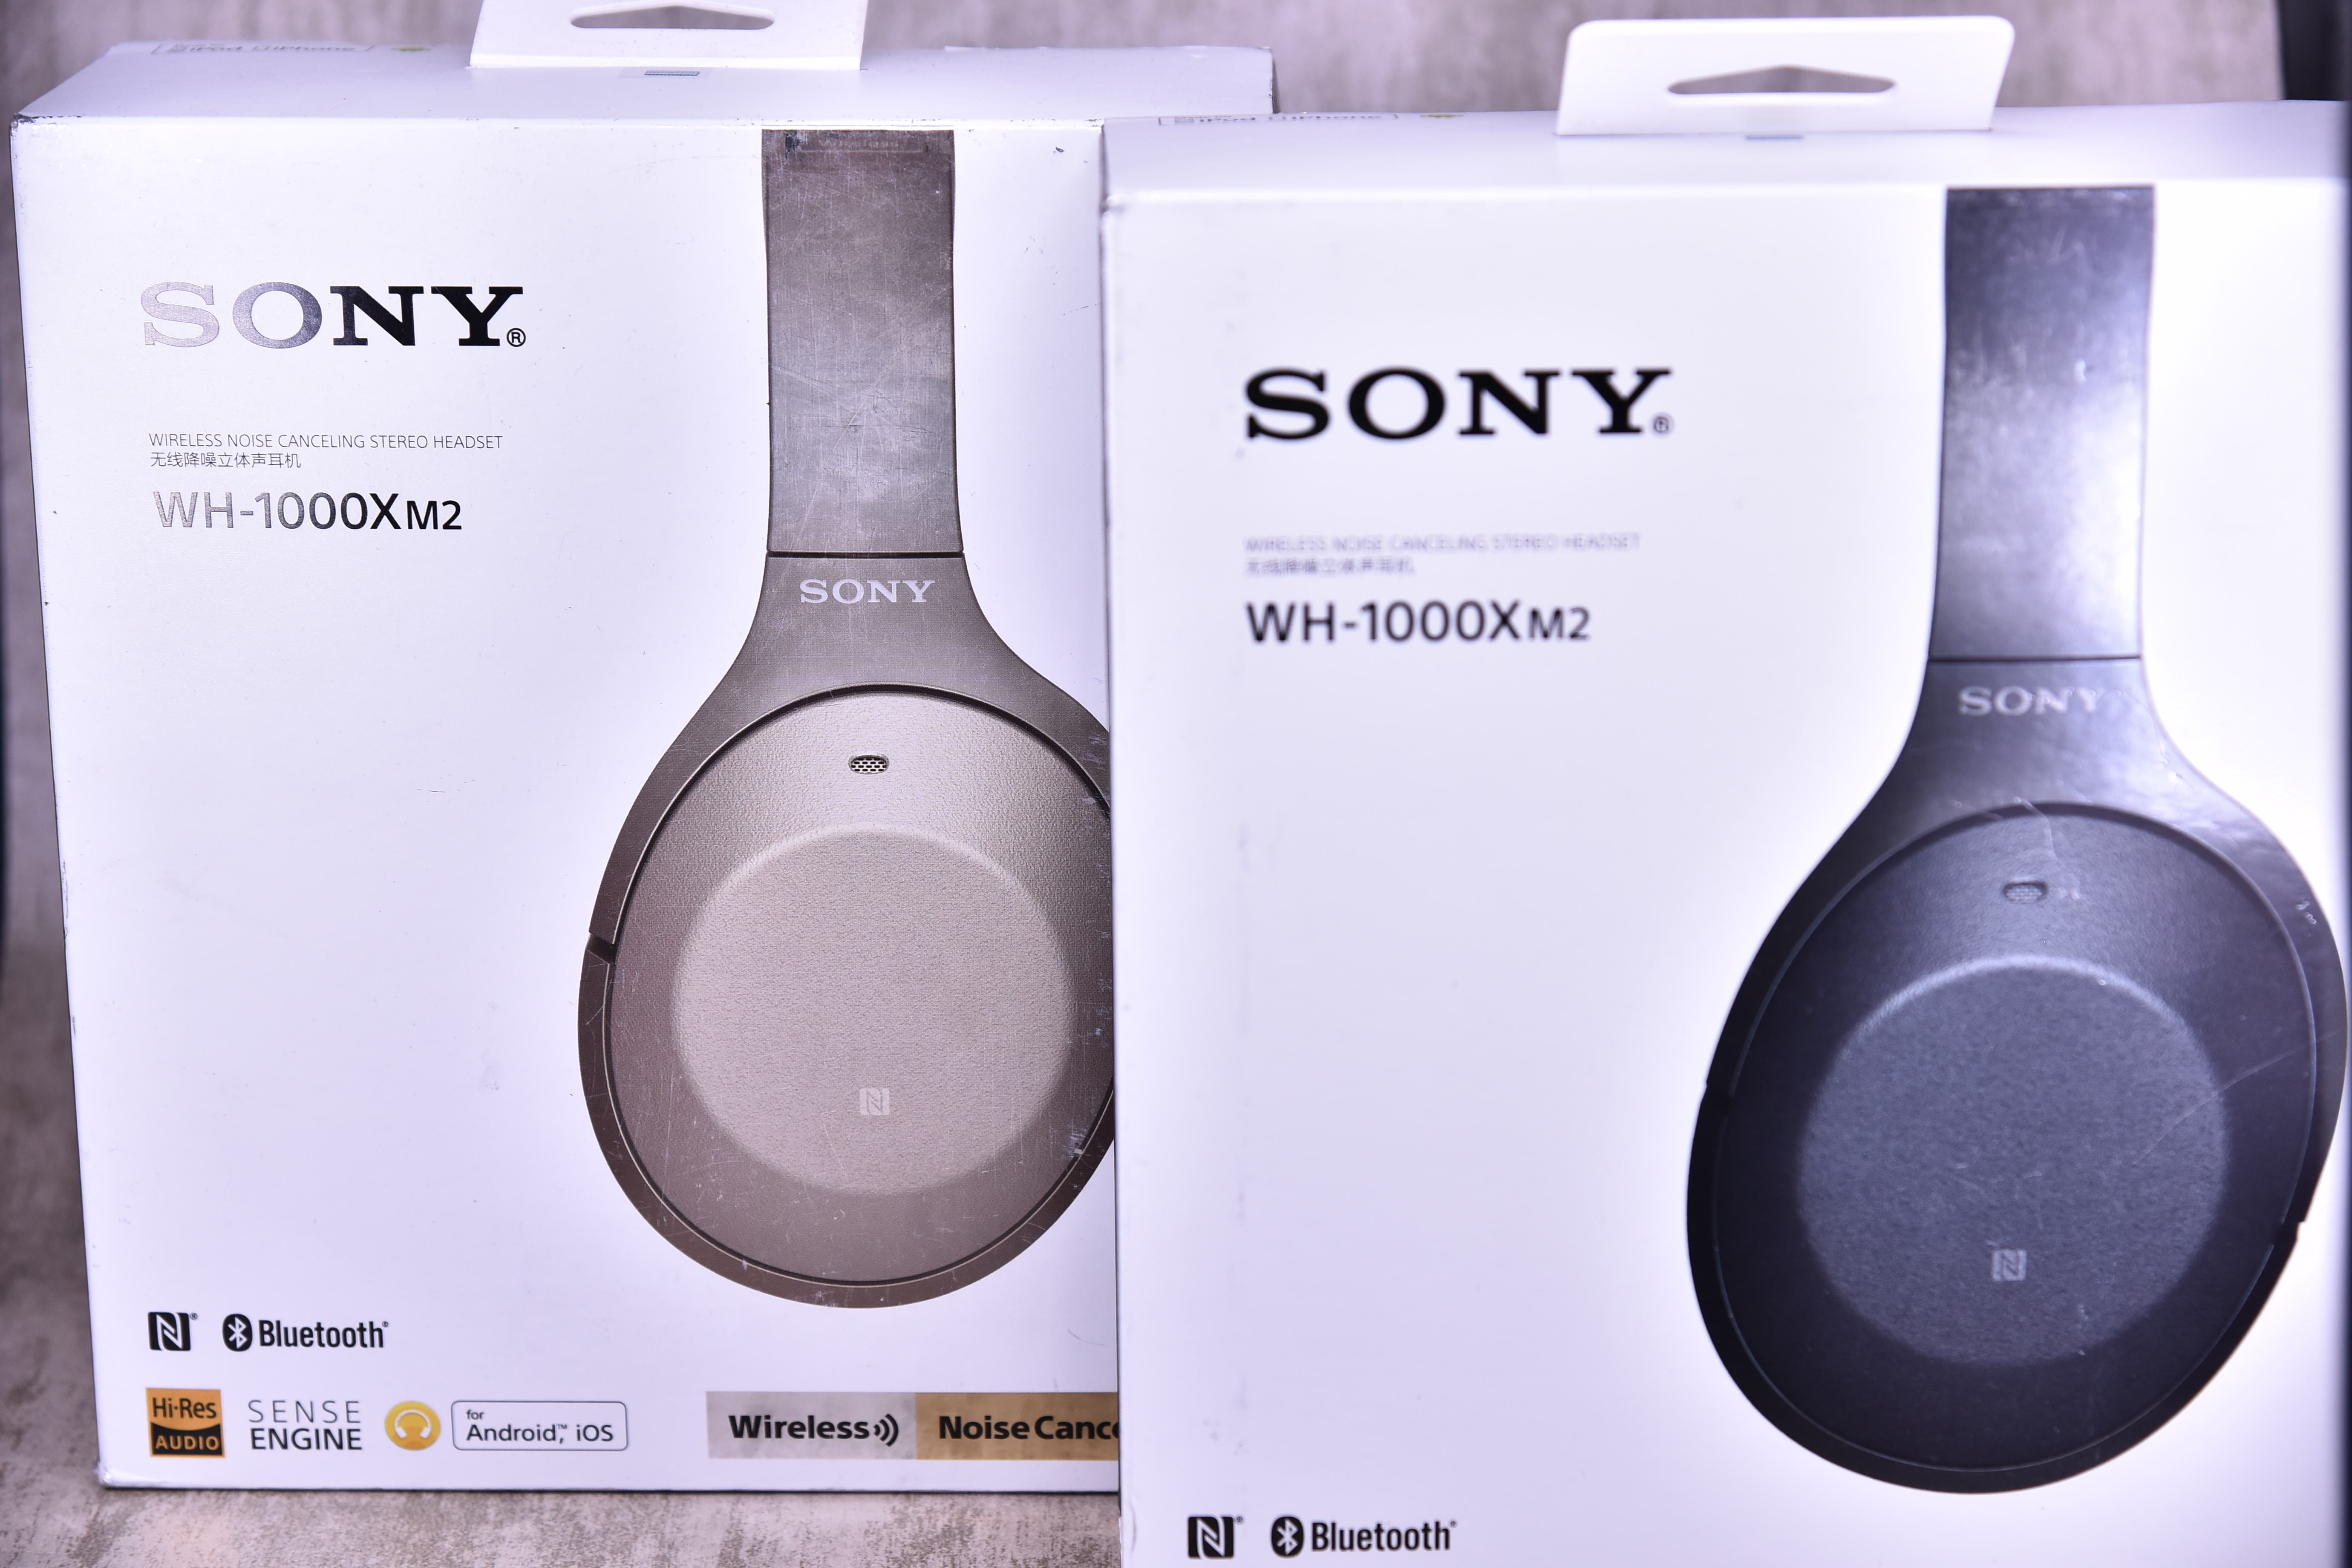 243 10 Sony Sony Mdr 1000x Wh 1000xm2 1000xm3 Headset With Wireless Bluetooth Noise Reduction From Best Taobao Agent Taobao International International Ecommerce Newbecca Com